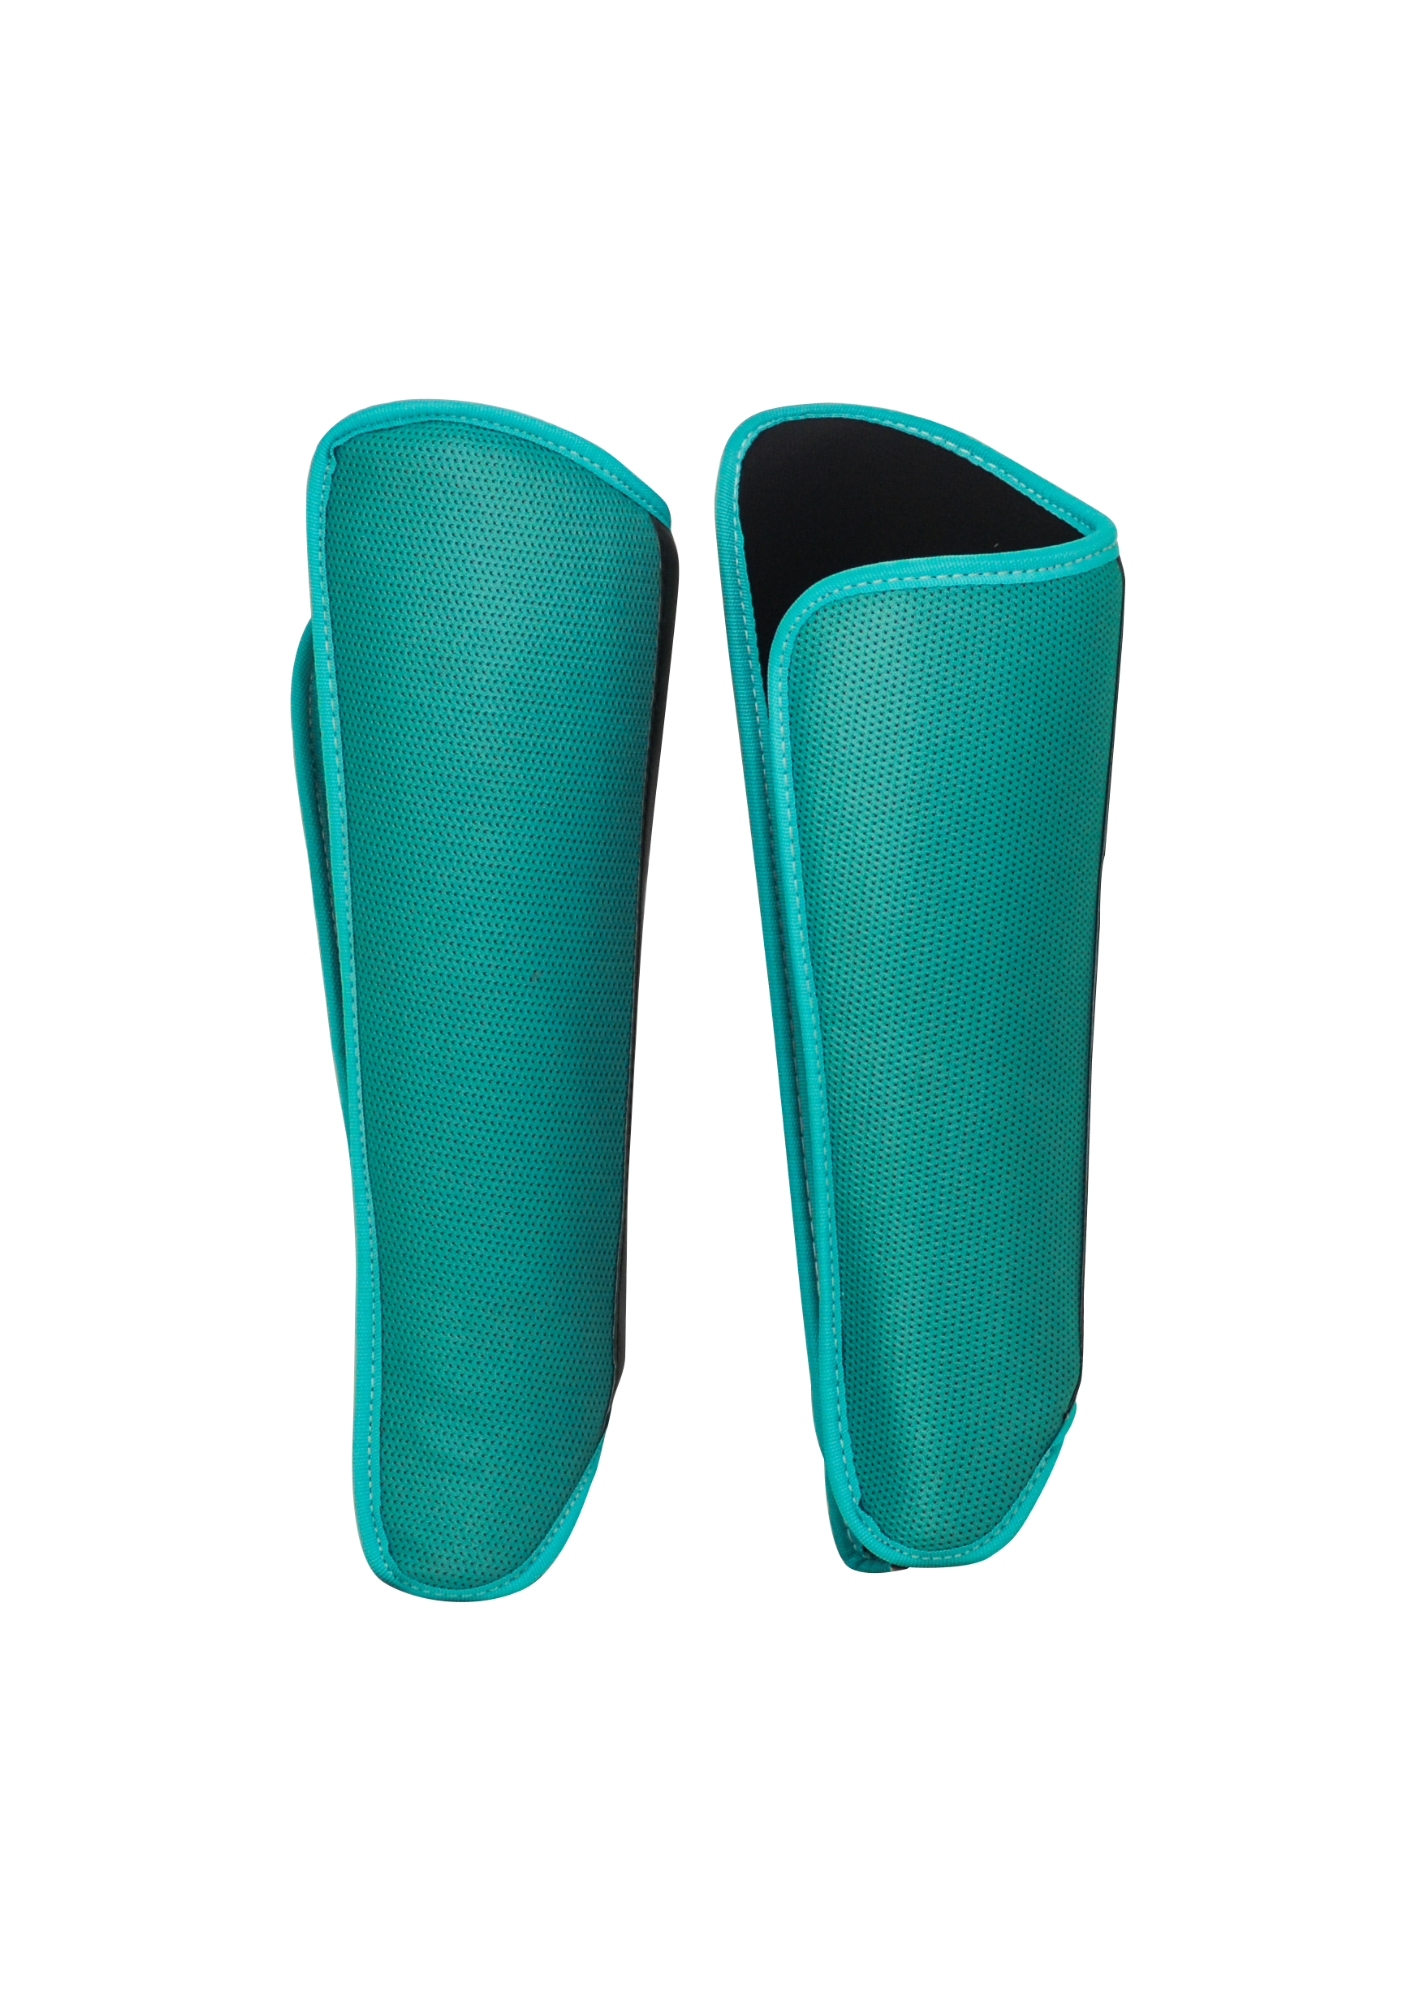 CANILLERAS GRYPHON ANATOMIC TEAL